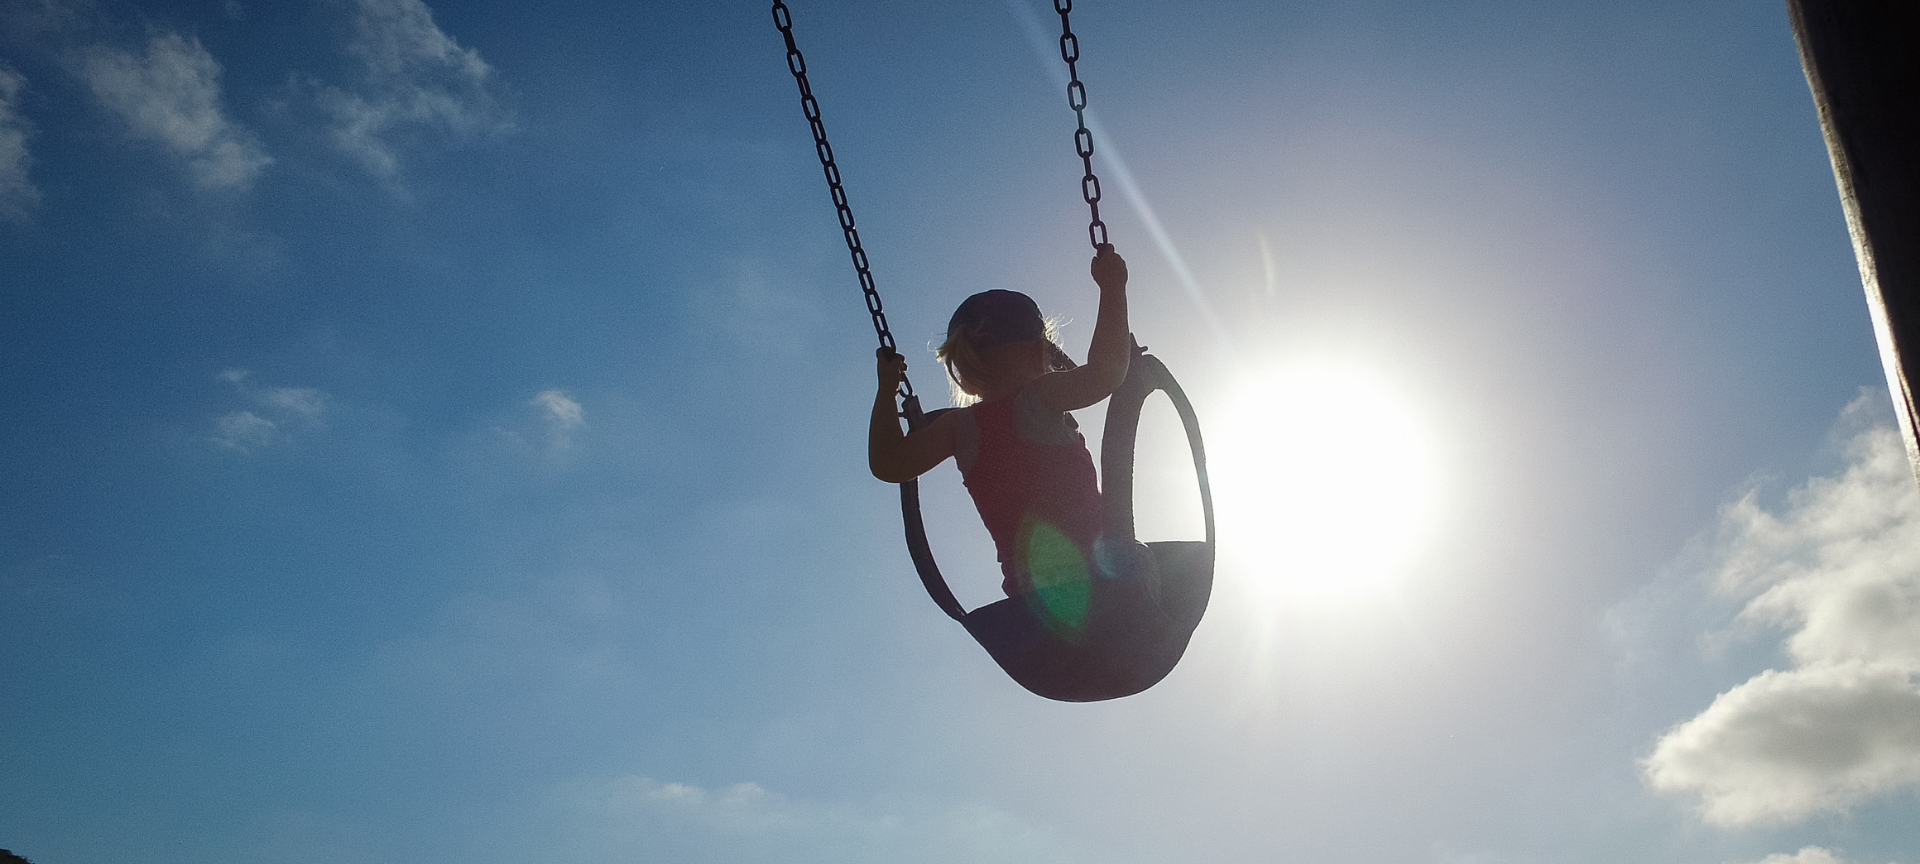 child on a swing